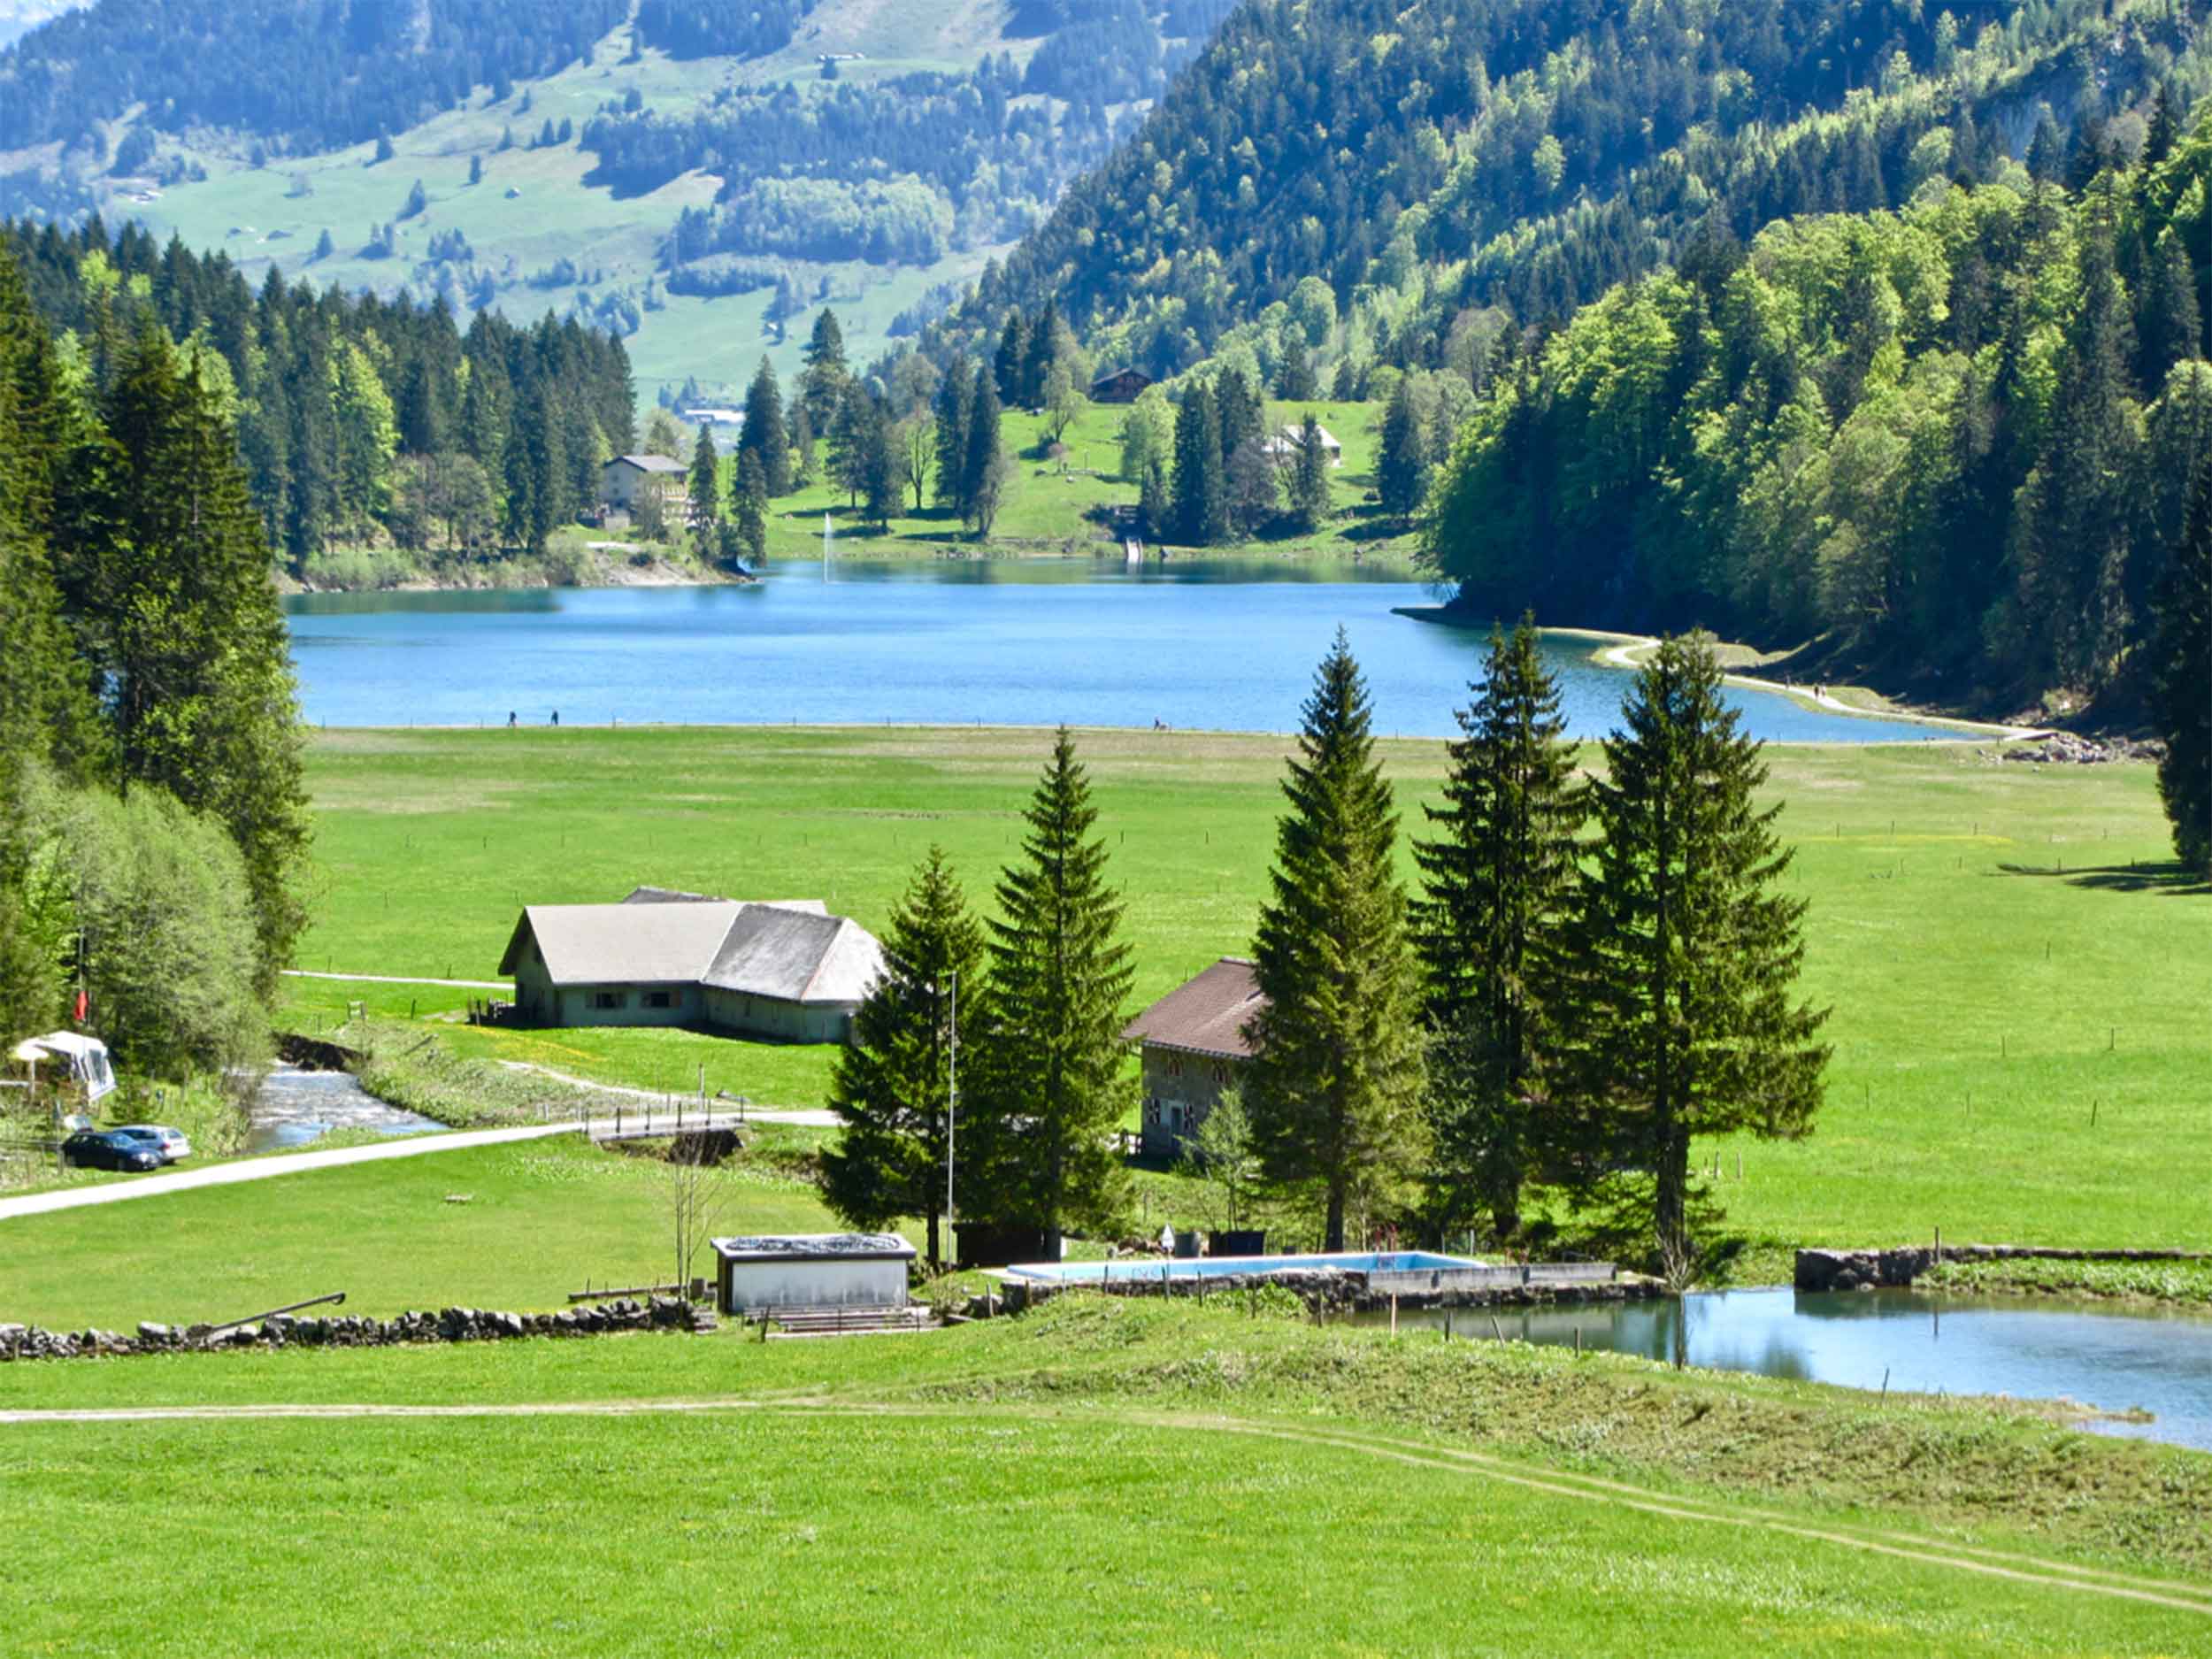 Alp Obersee Stafel and Rautialp Tour by Erwin Tours of Switzerland - Customized and Personal Farm Tours in Switzerland - Photo © Erwin Fässler Photography